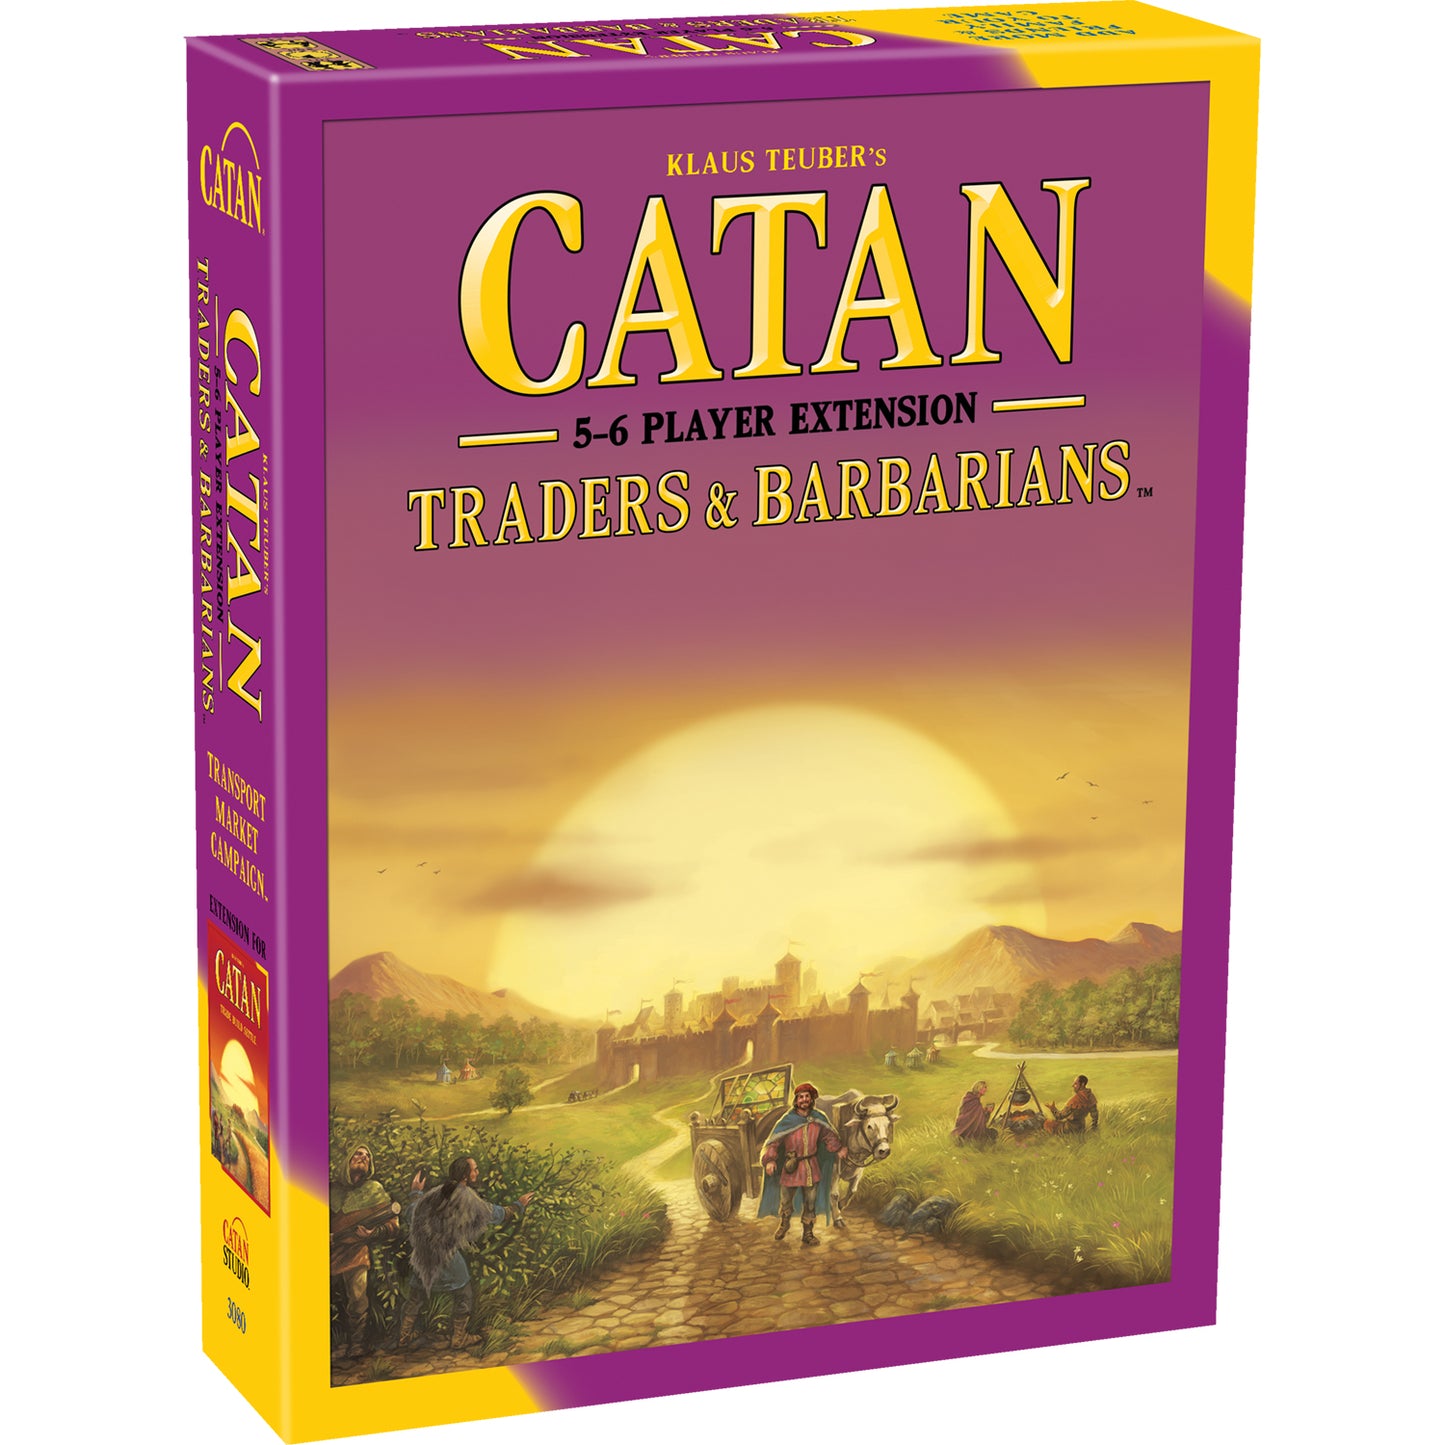 Catan Traders & Barbarians 5-6 Player Extension